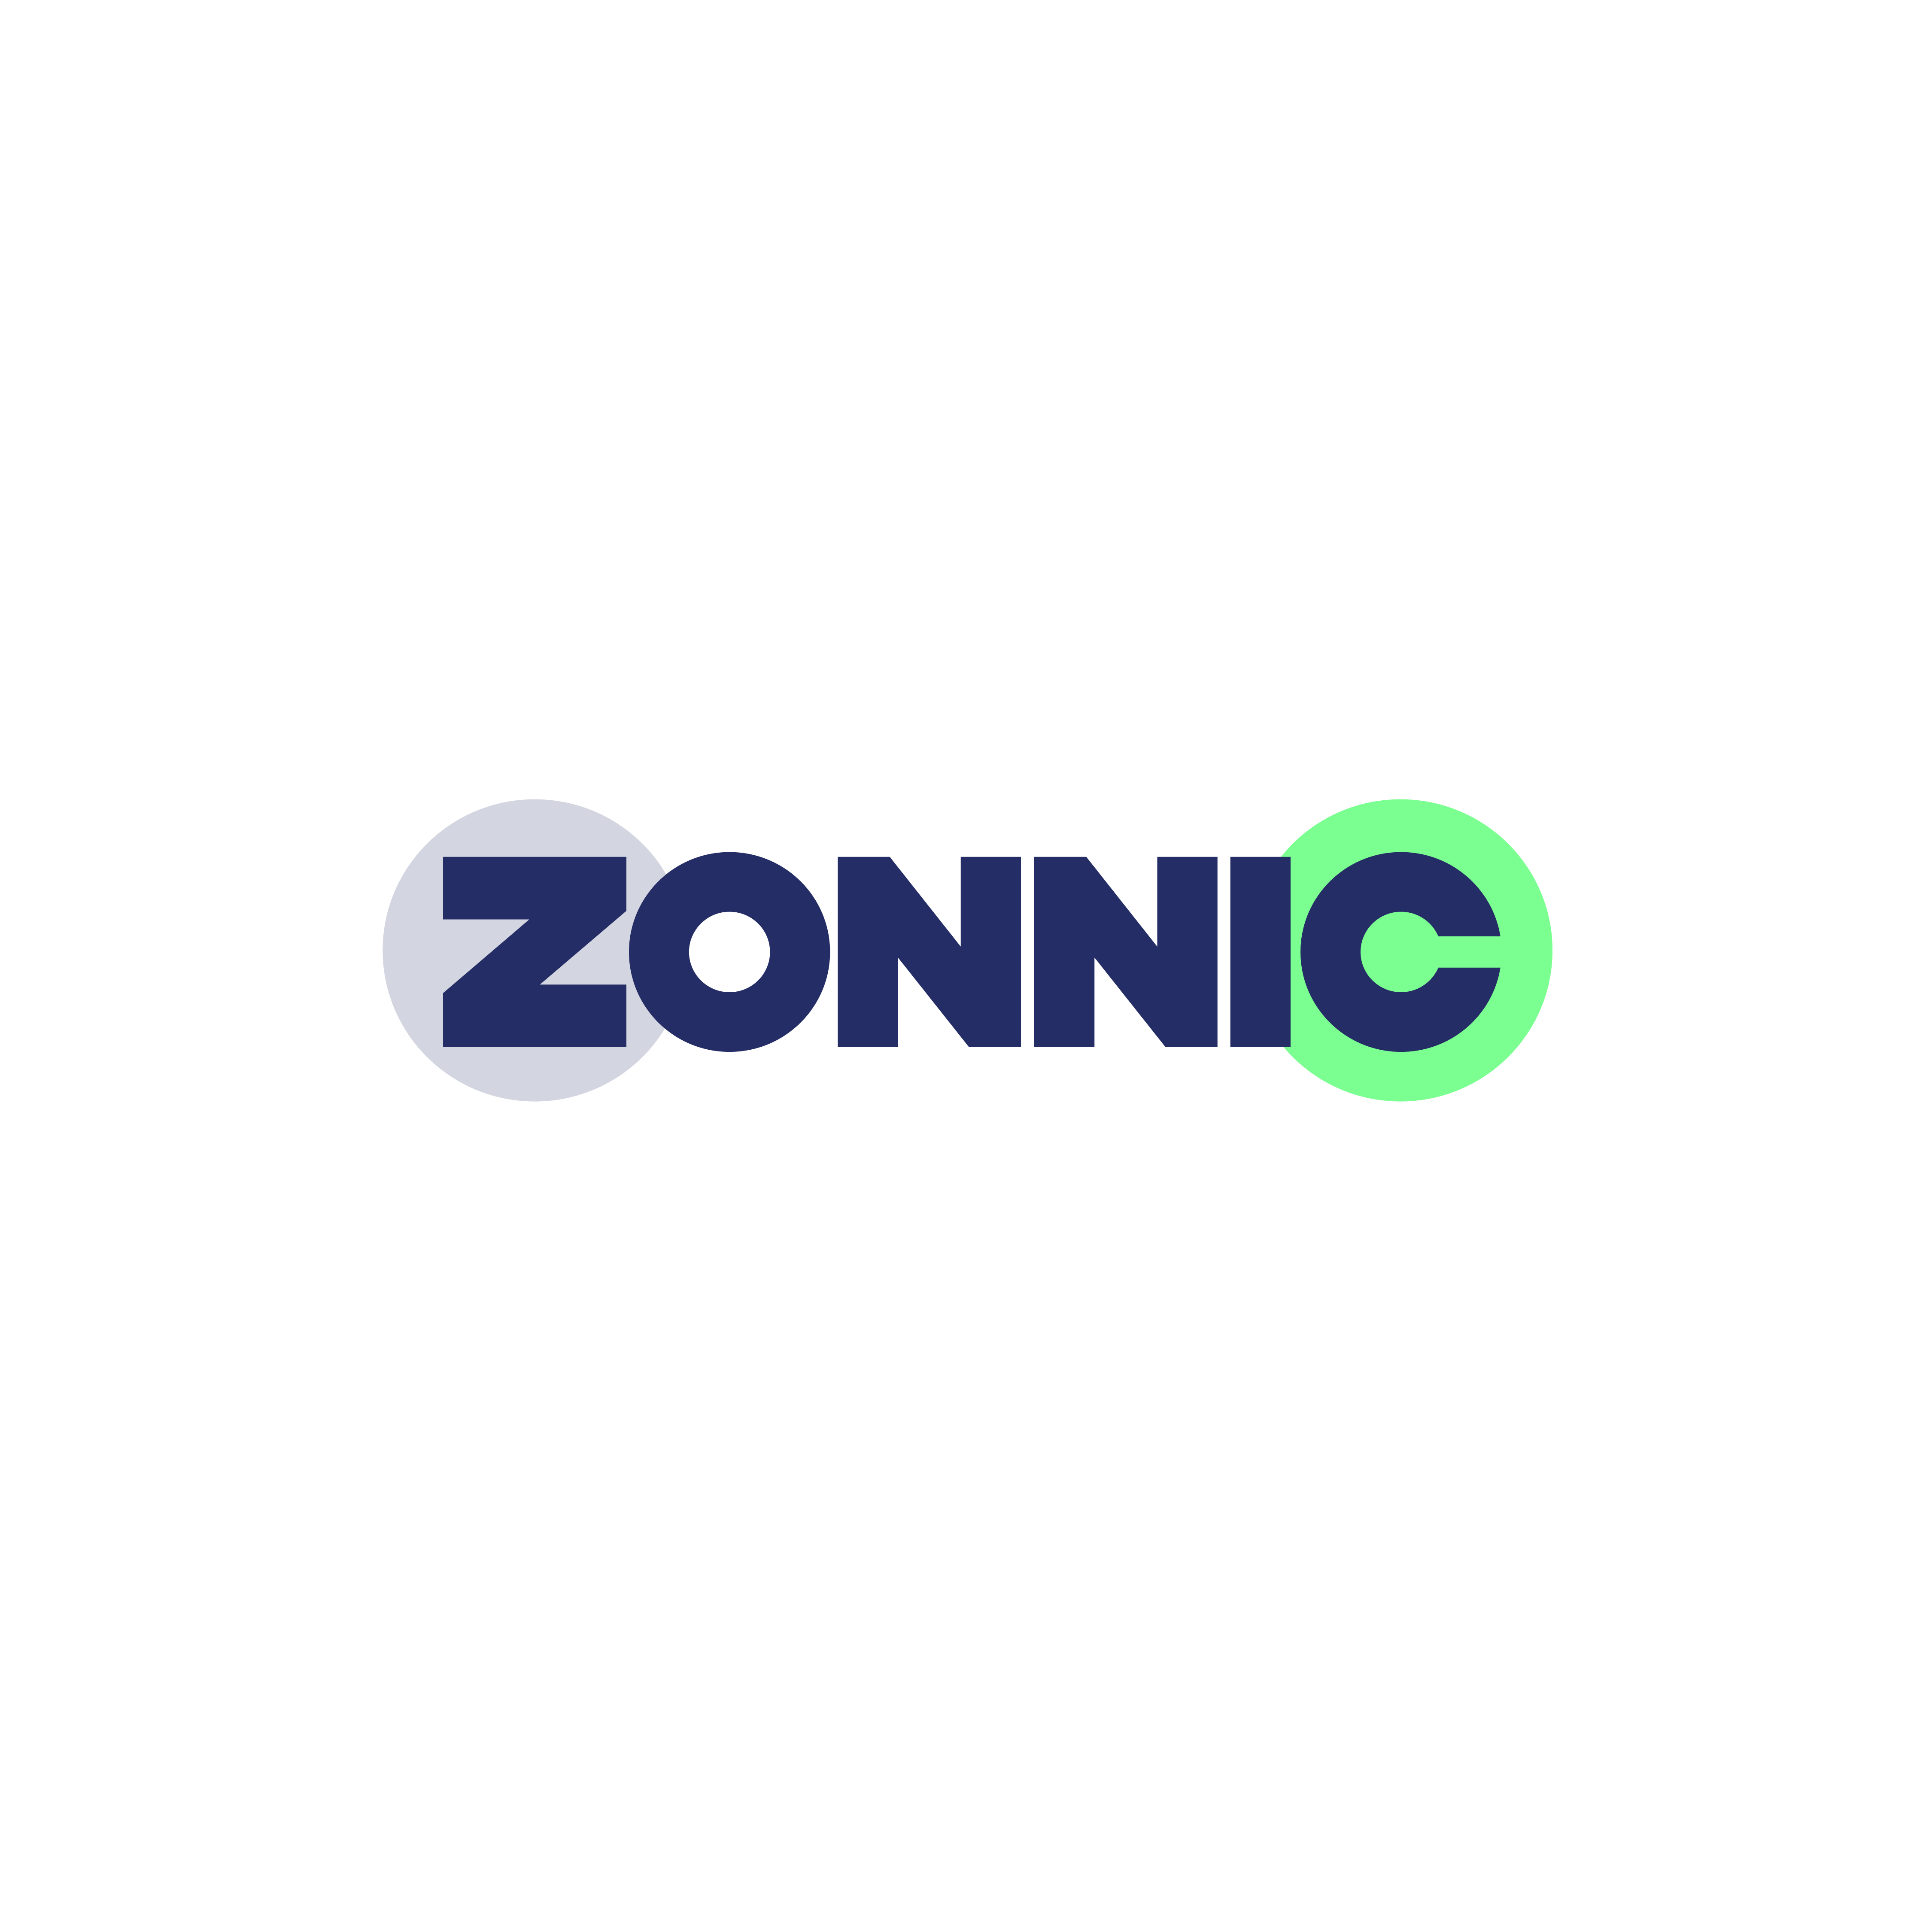 ZONNIC-LOGO.png